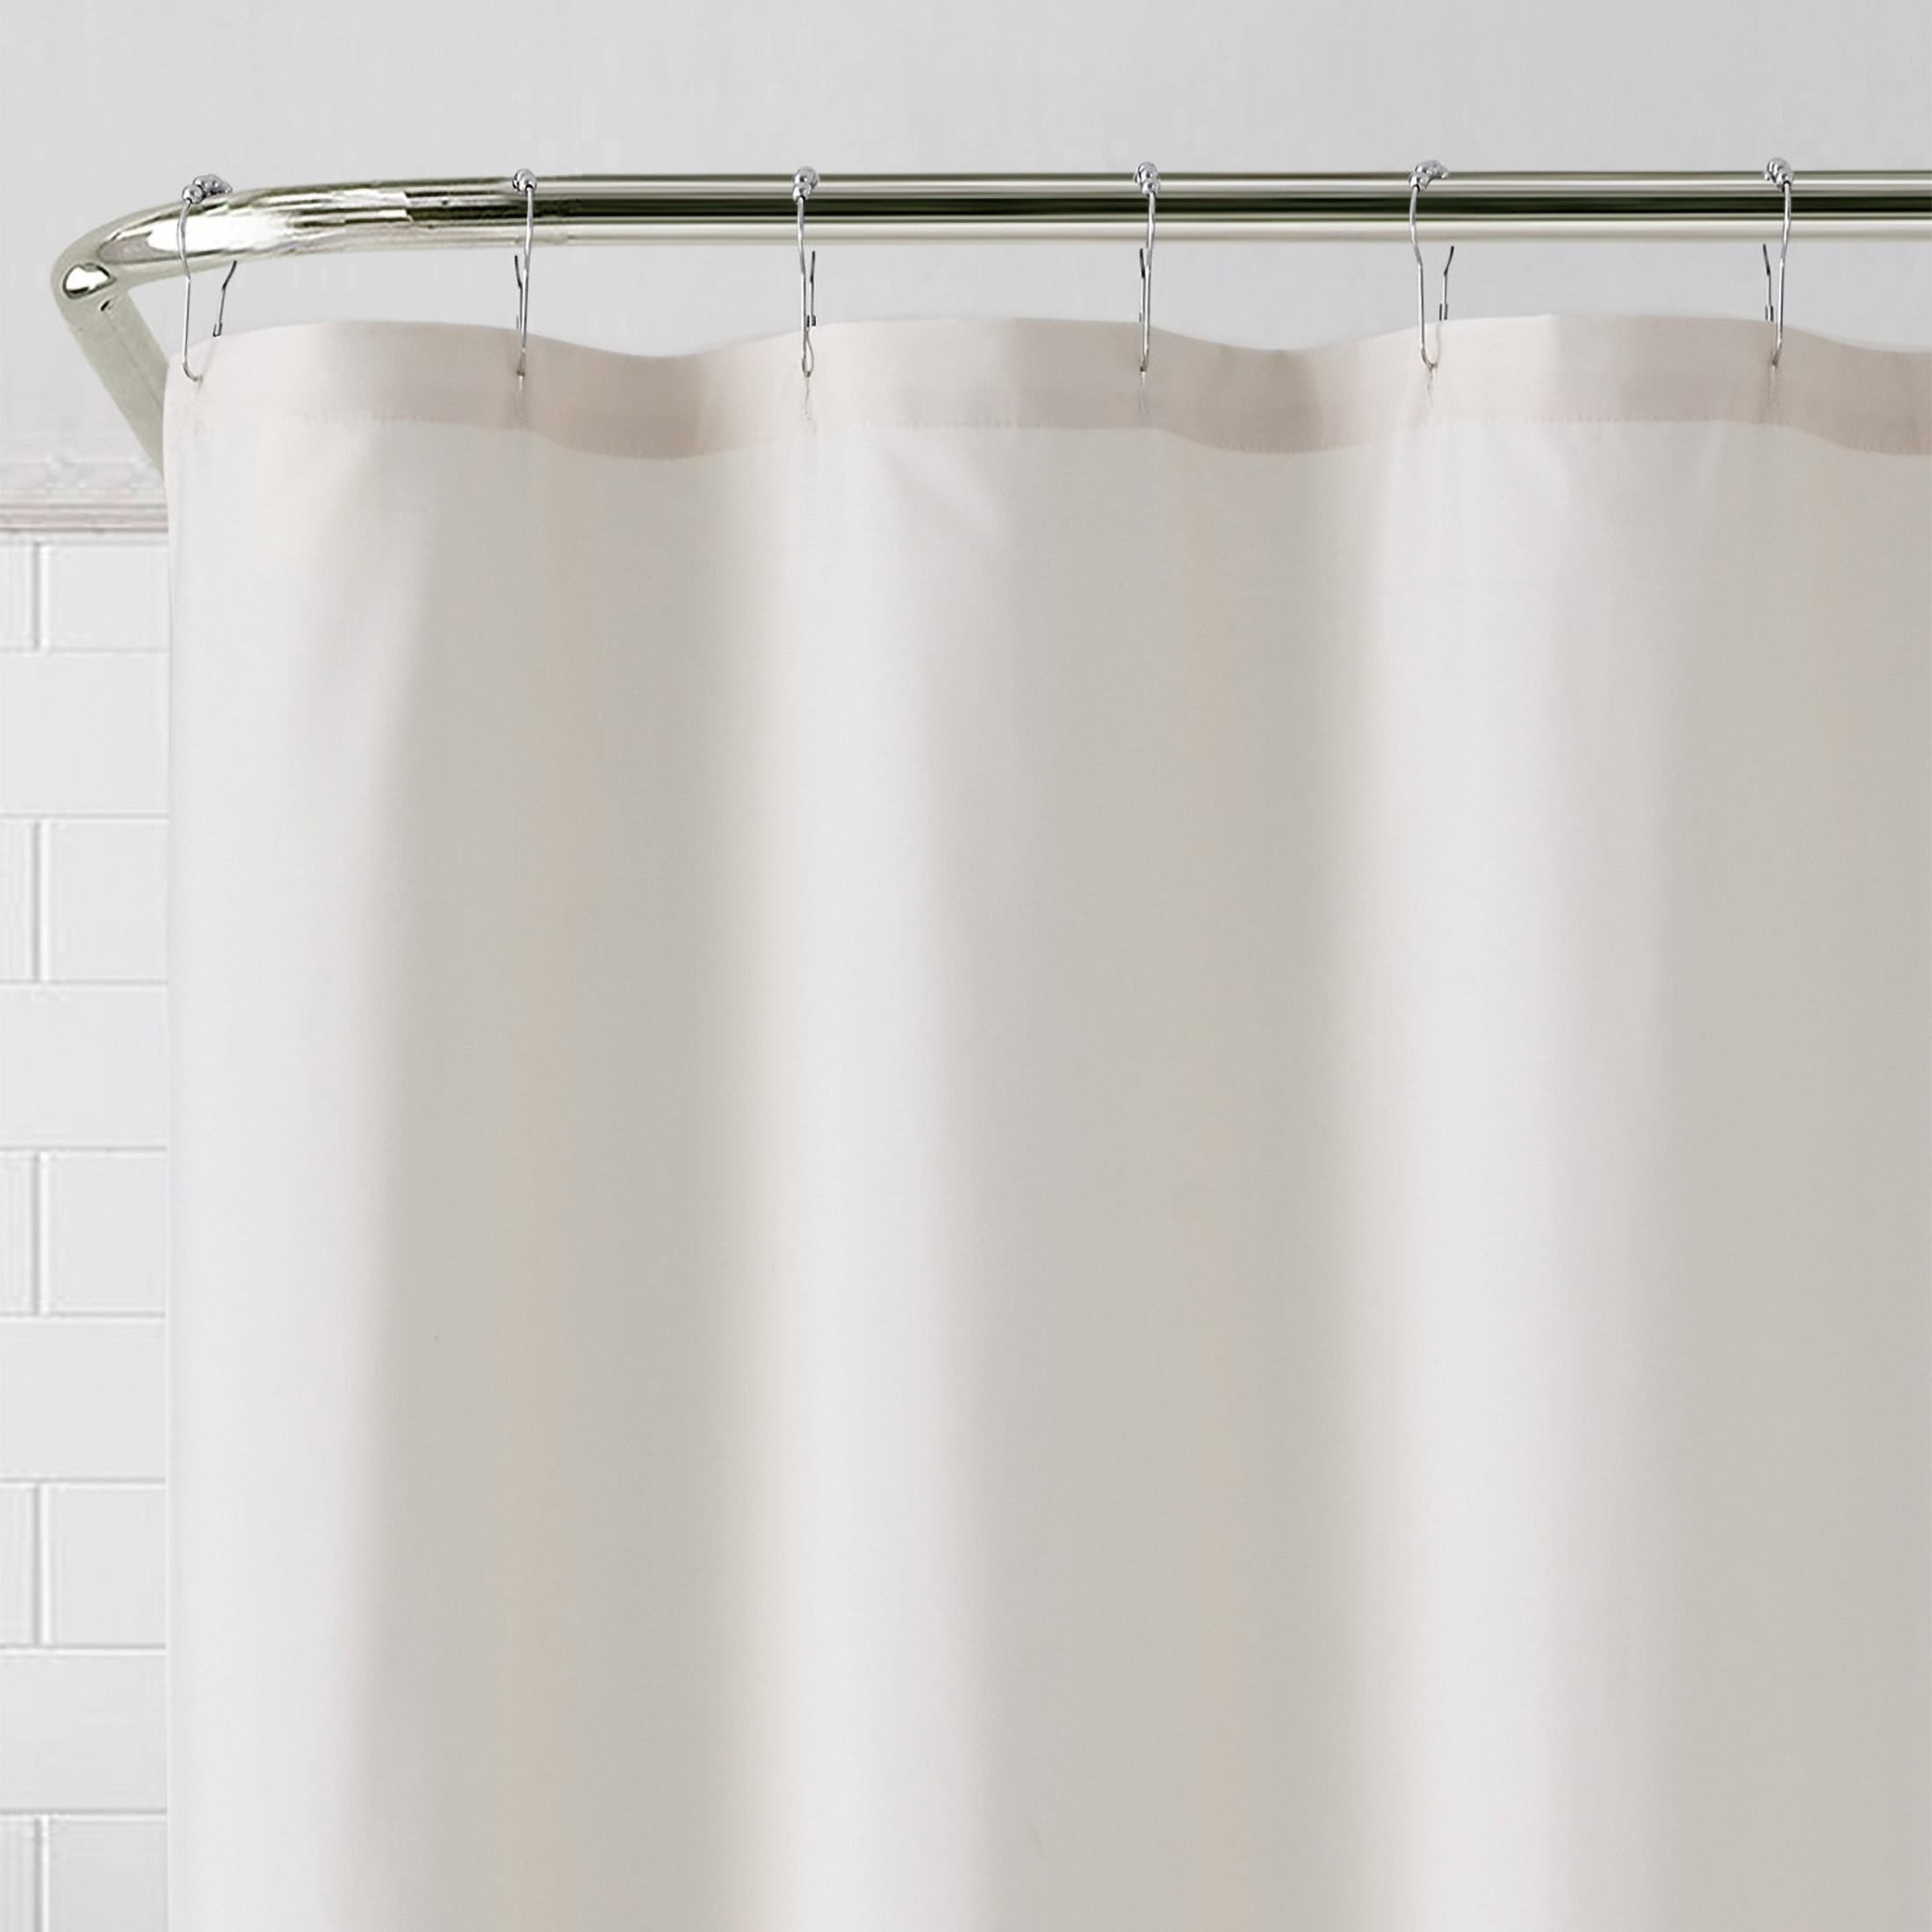 VCNY Home Melanie Taupe Solid Ruffle Polyester Shower Curtain, 72" x 72" - image 3 of 5